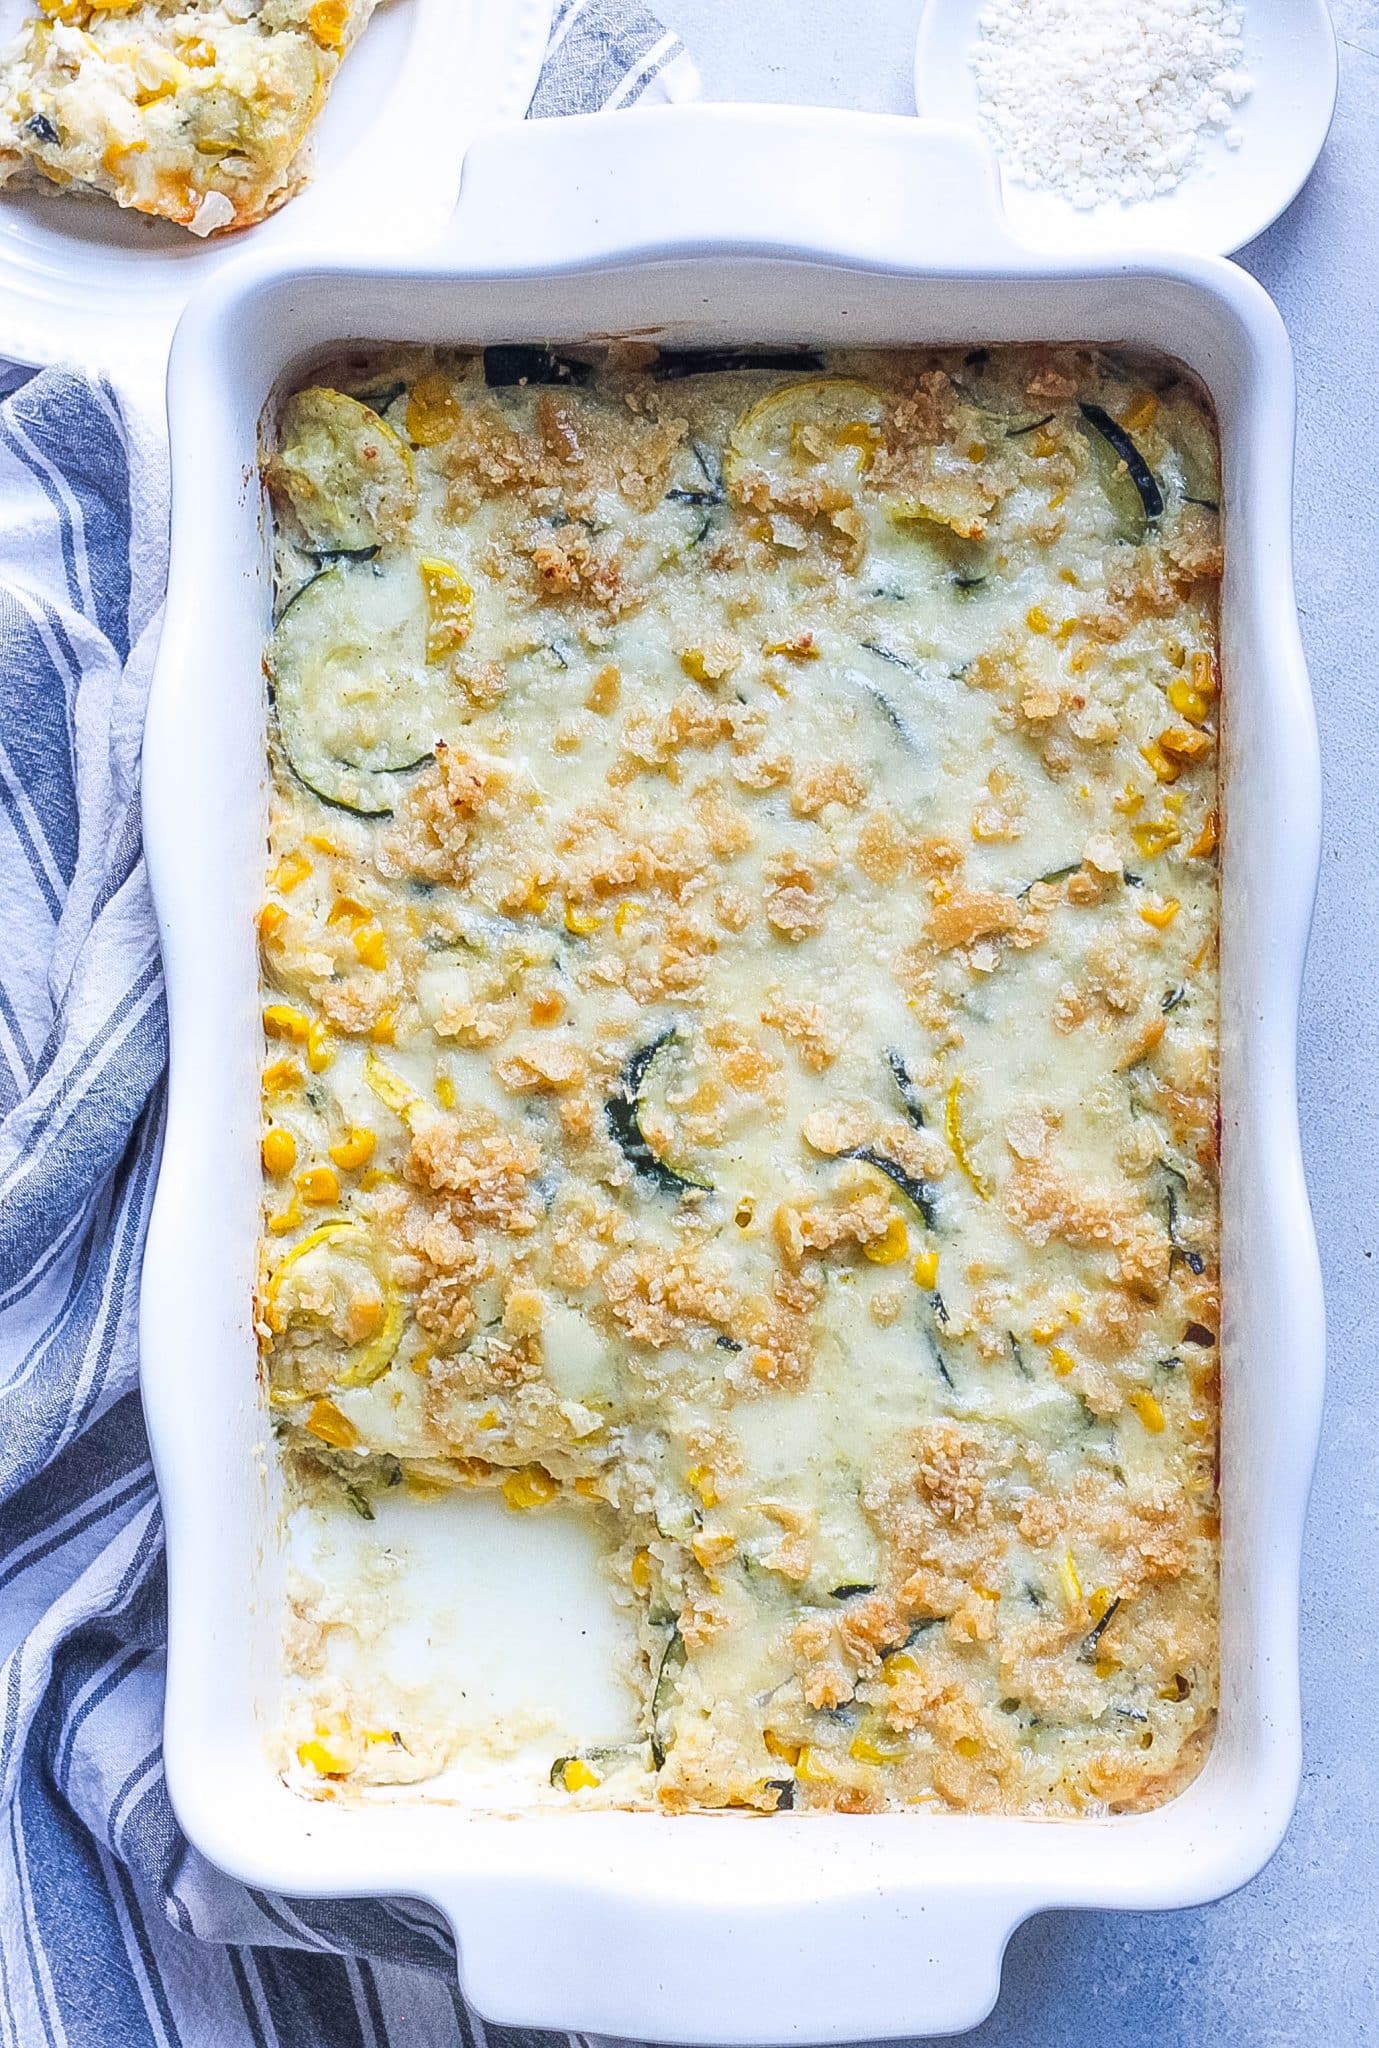 Cheesy Zucchini and Squash Casserole (makes the BEST side dish)